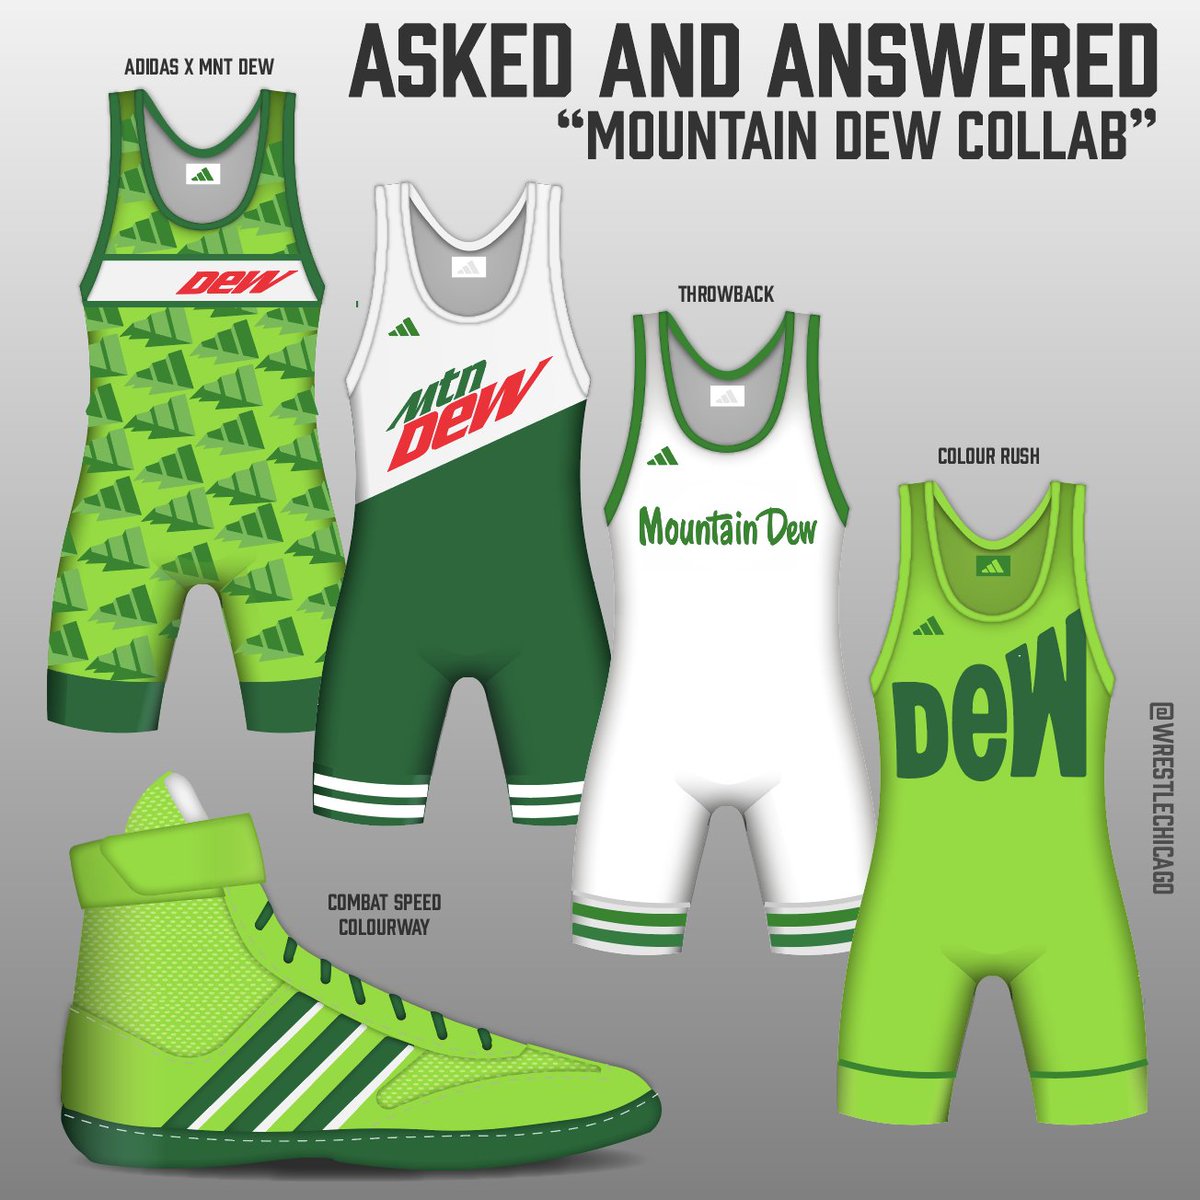 Asked and Answered. Whenever I ask for wrestling collab suggestions, I always get Mountain Dew. So, here we go...